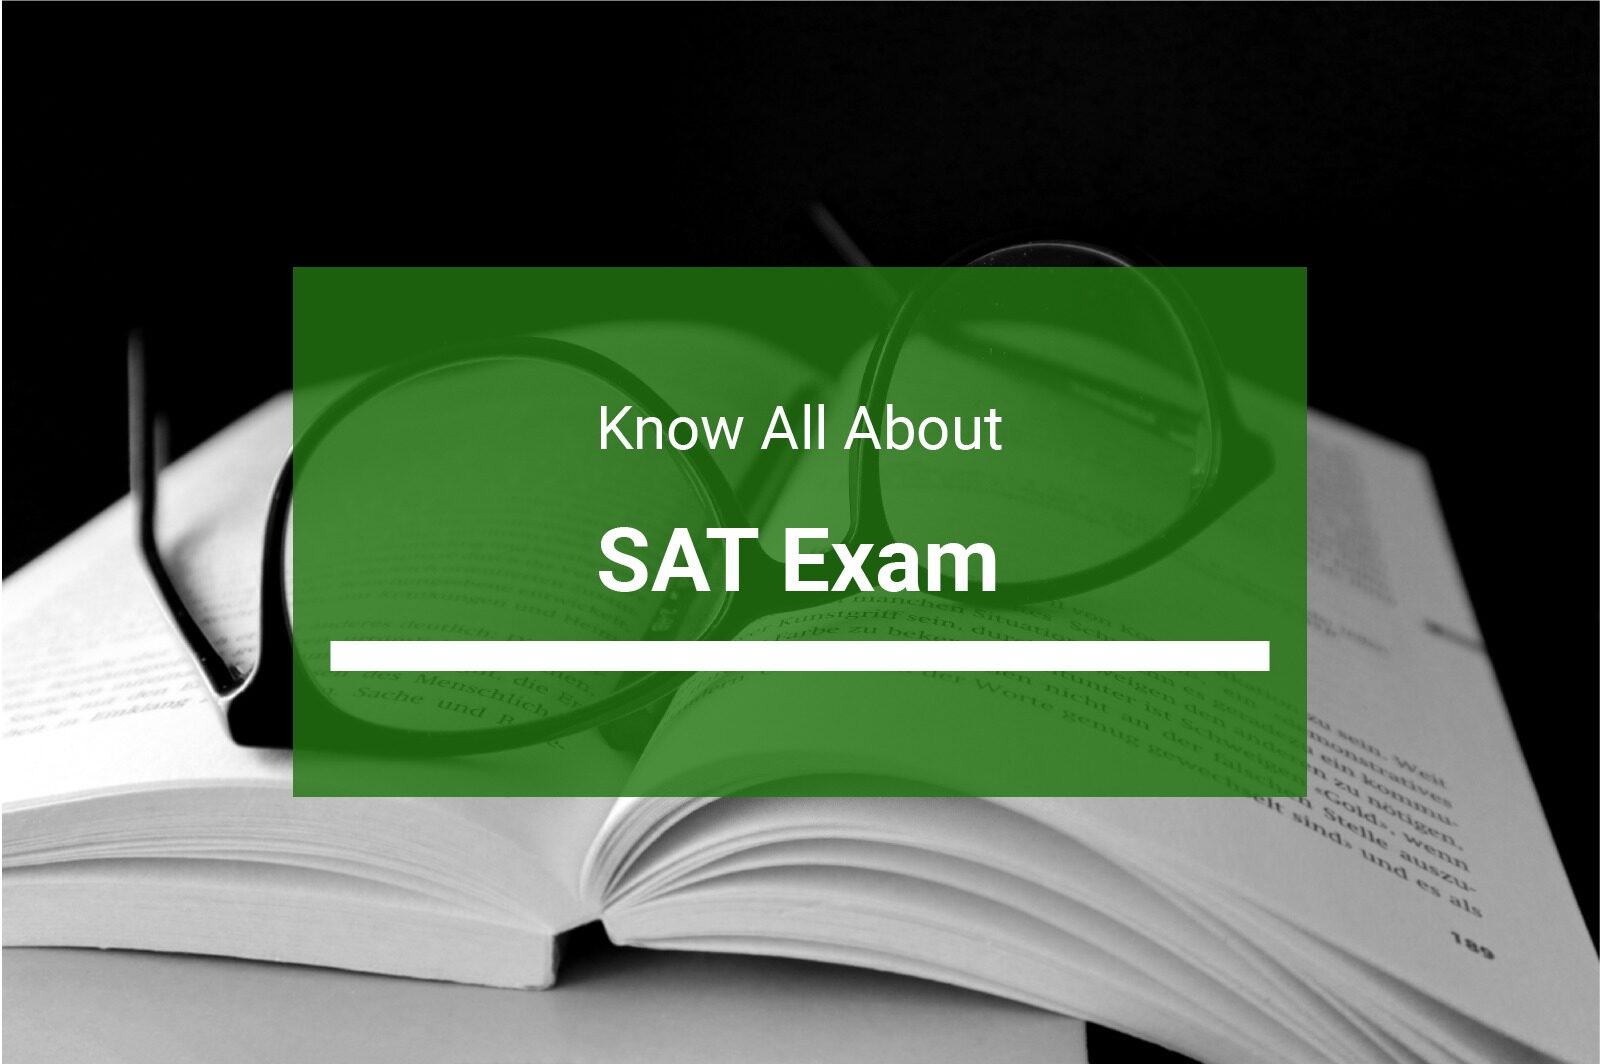 8 Tips to Prepare For Your SAT Exam